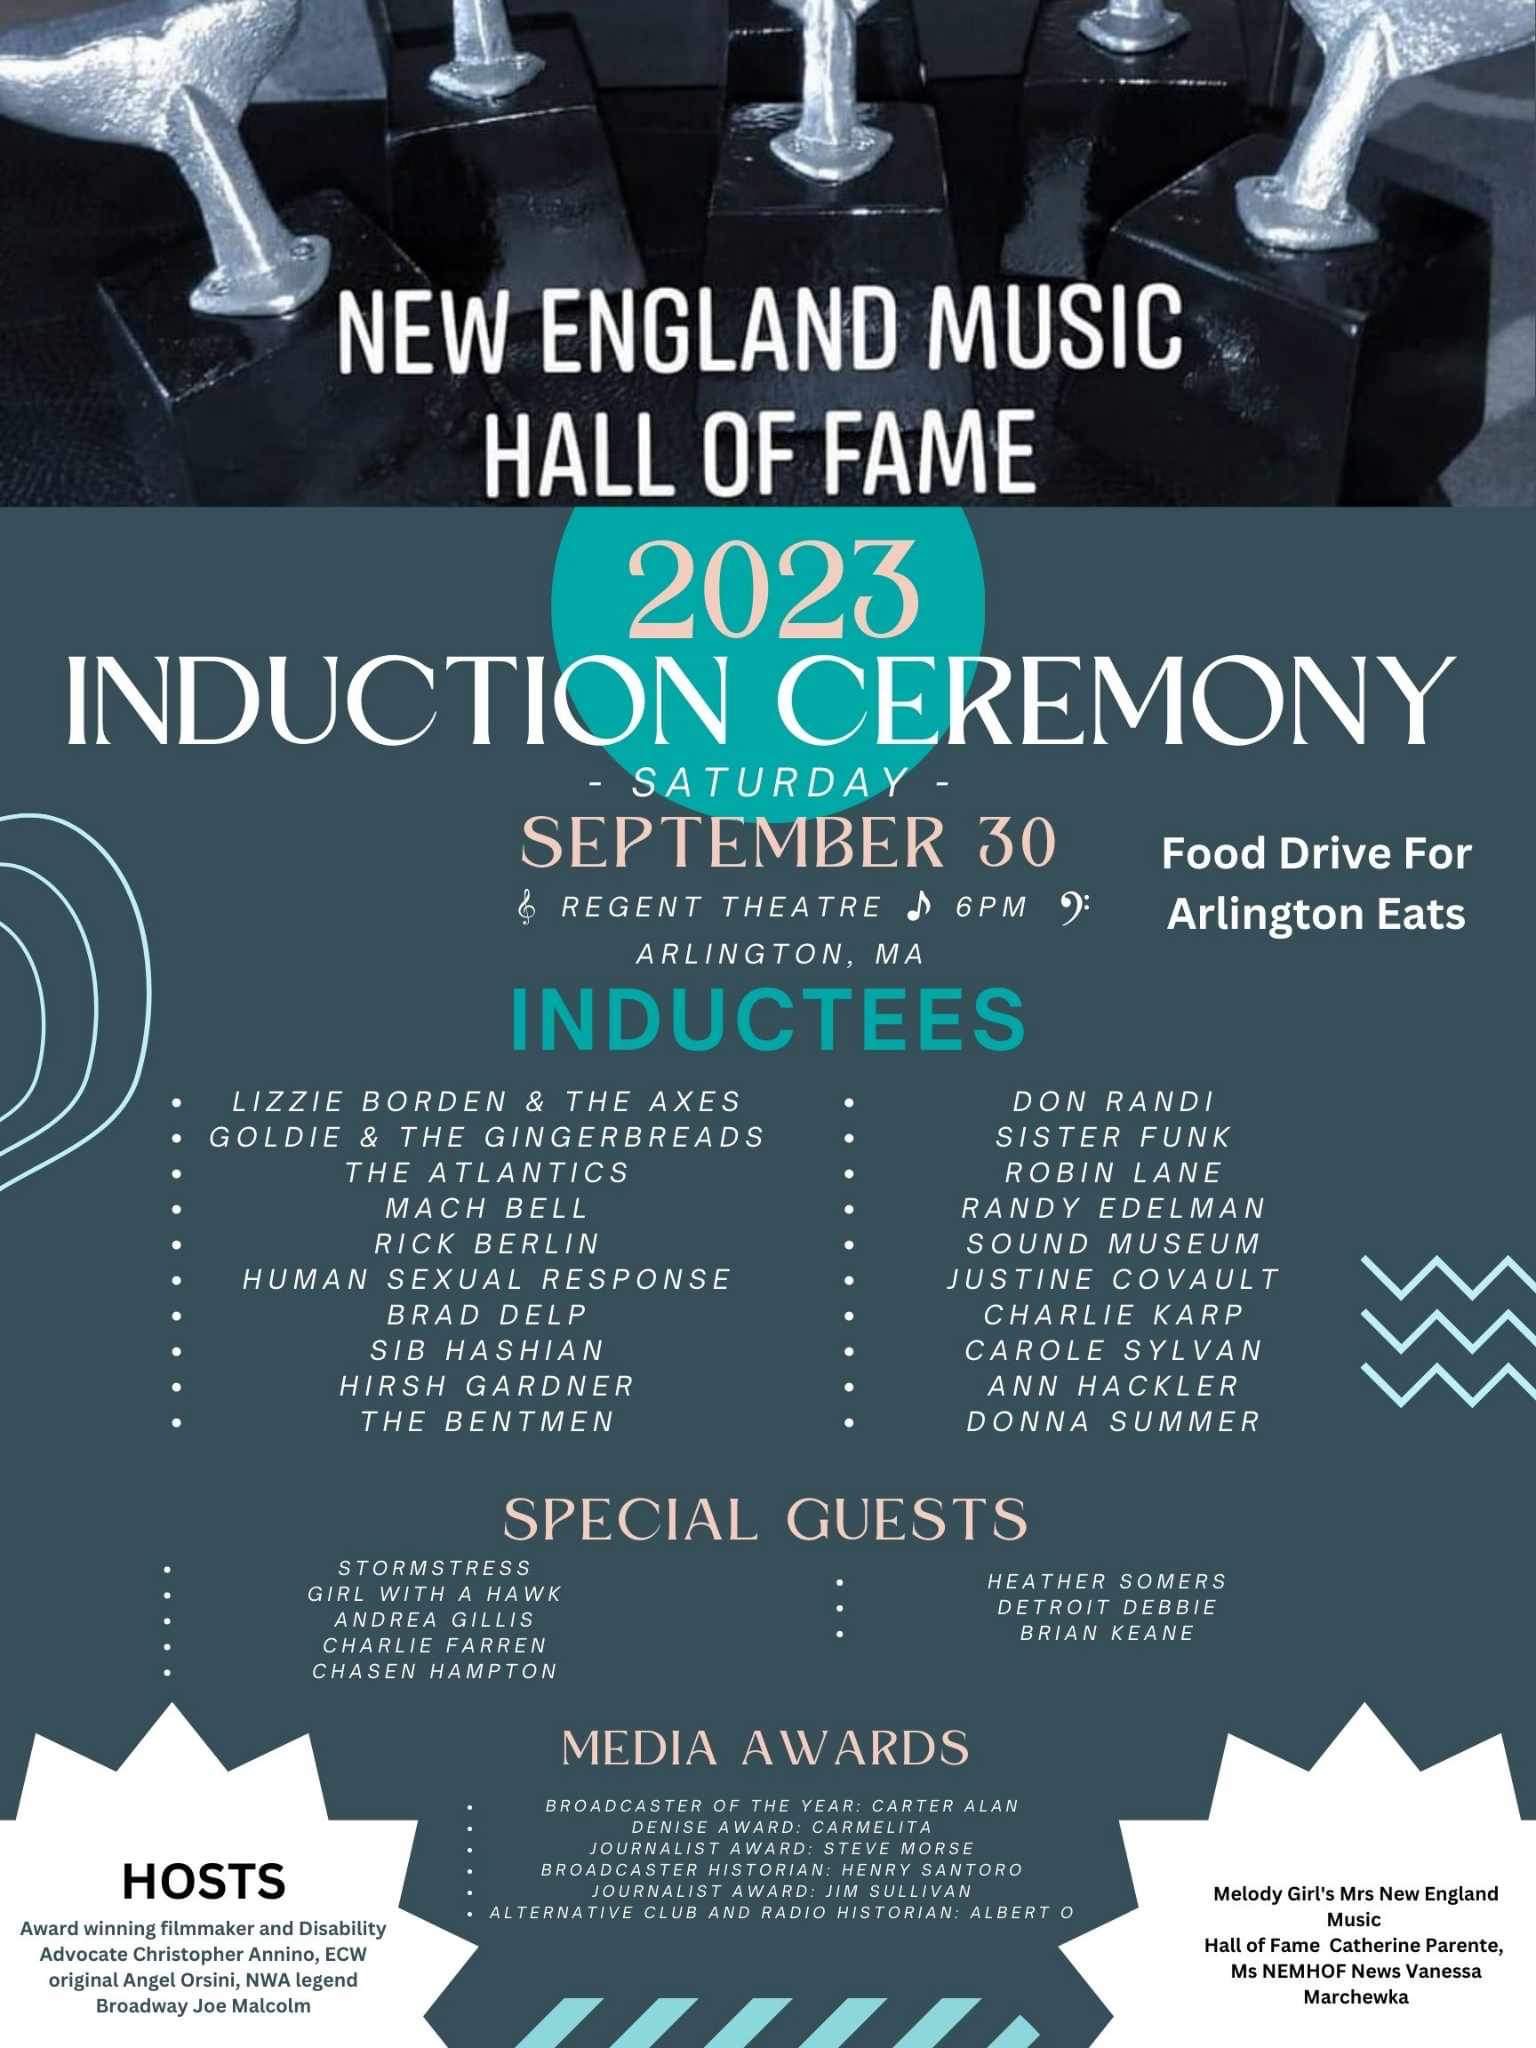 New England Music Hall of Fame 2023 Induction, Saturday September 30, 2023 In Arlington, Mass